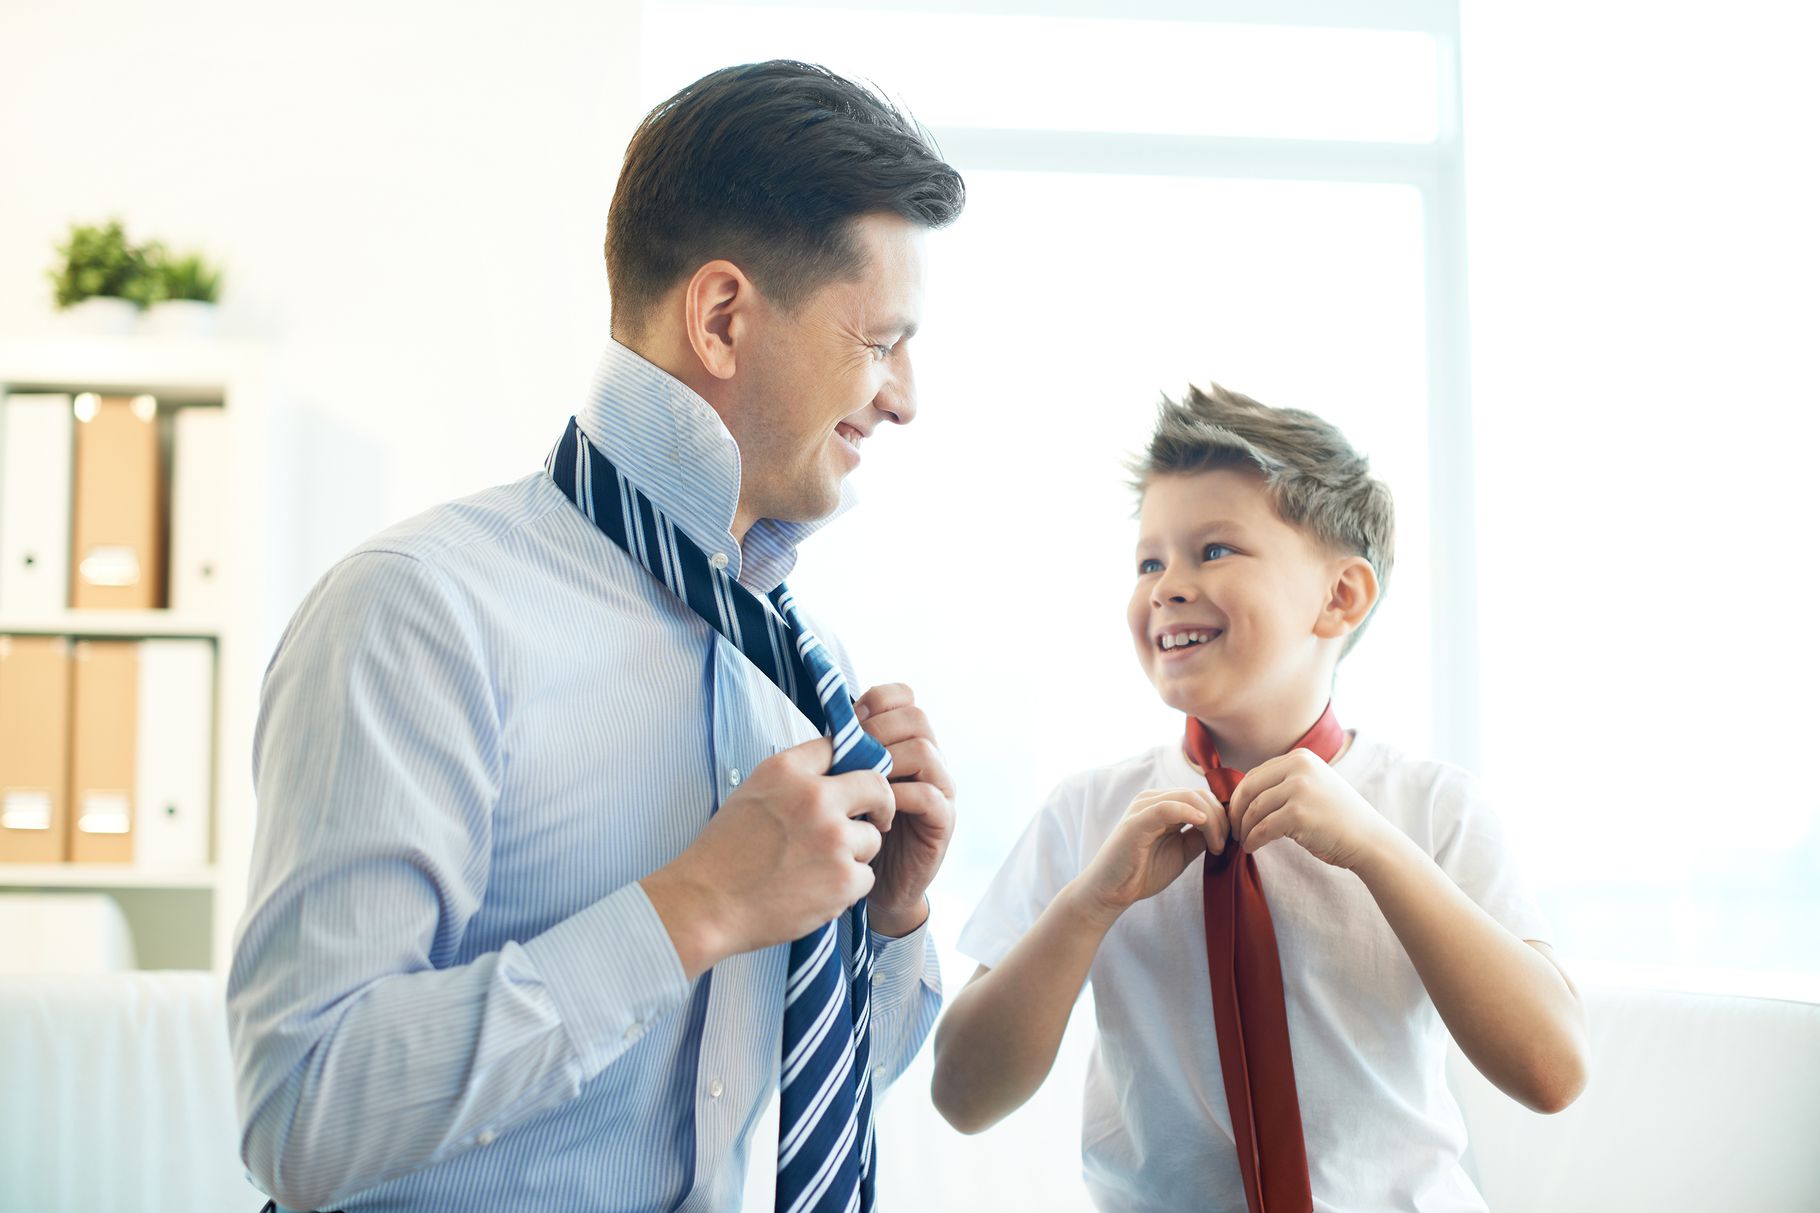 Folly of the Week – How the necktie industry saved Fathers Day